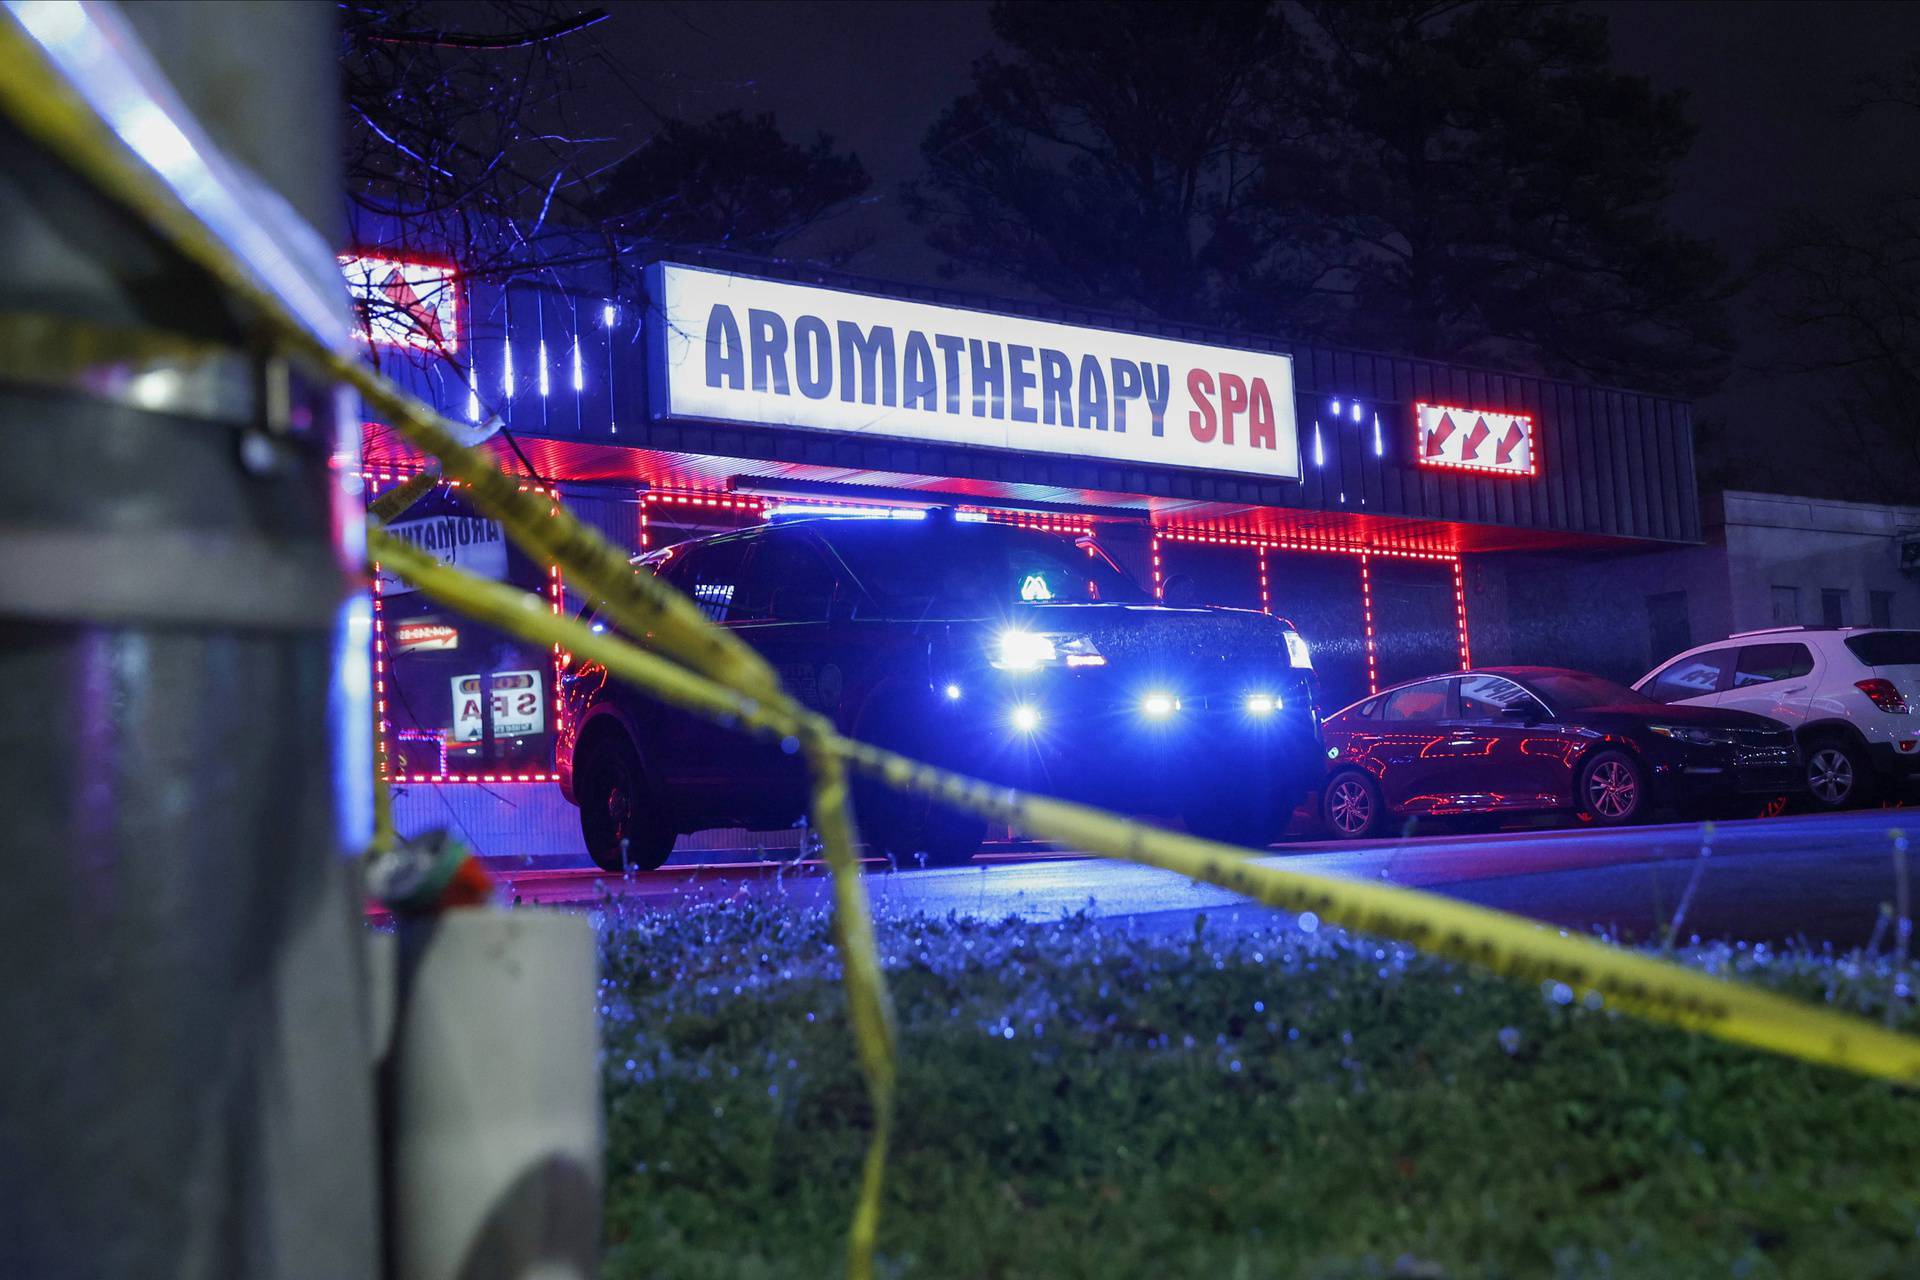 Crime scene tape is seen outside Aromatherapy Spa after shootings at a massage parlor and two day spas in the Atlanta area, in Georgia